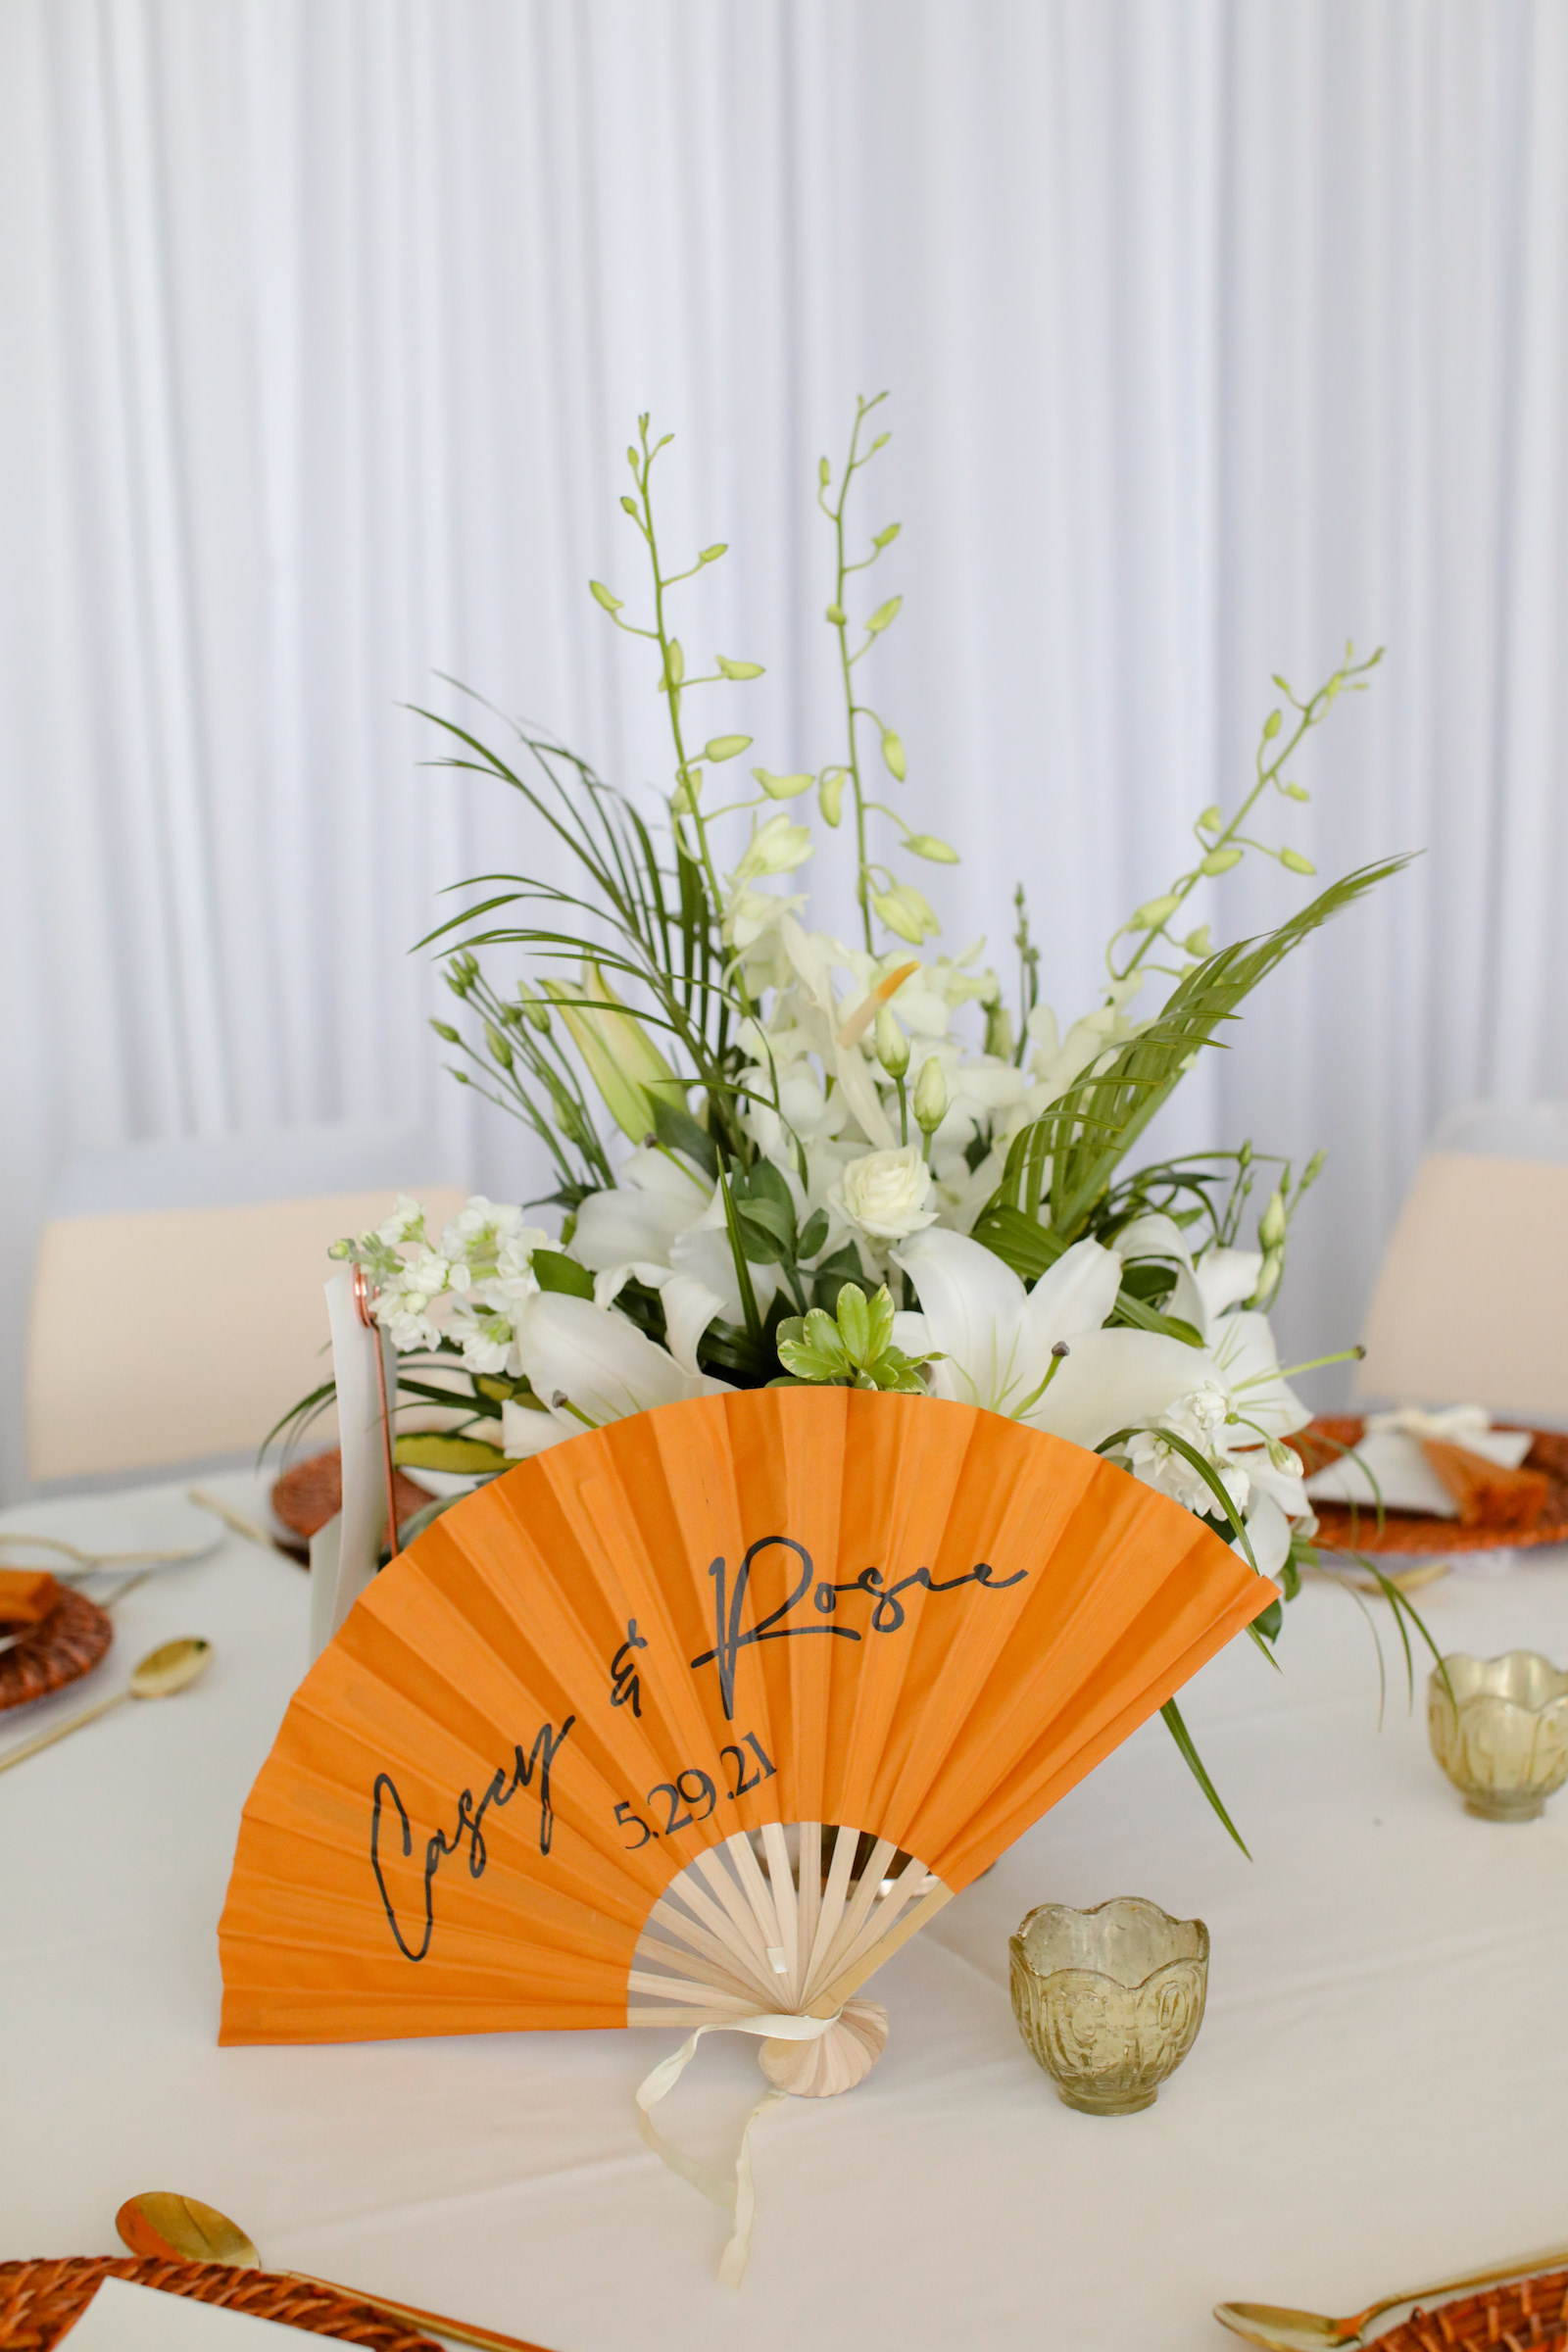 Monogramed Fan Party Favor for Wedding Guest